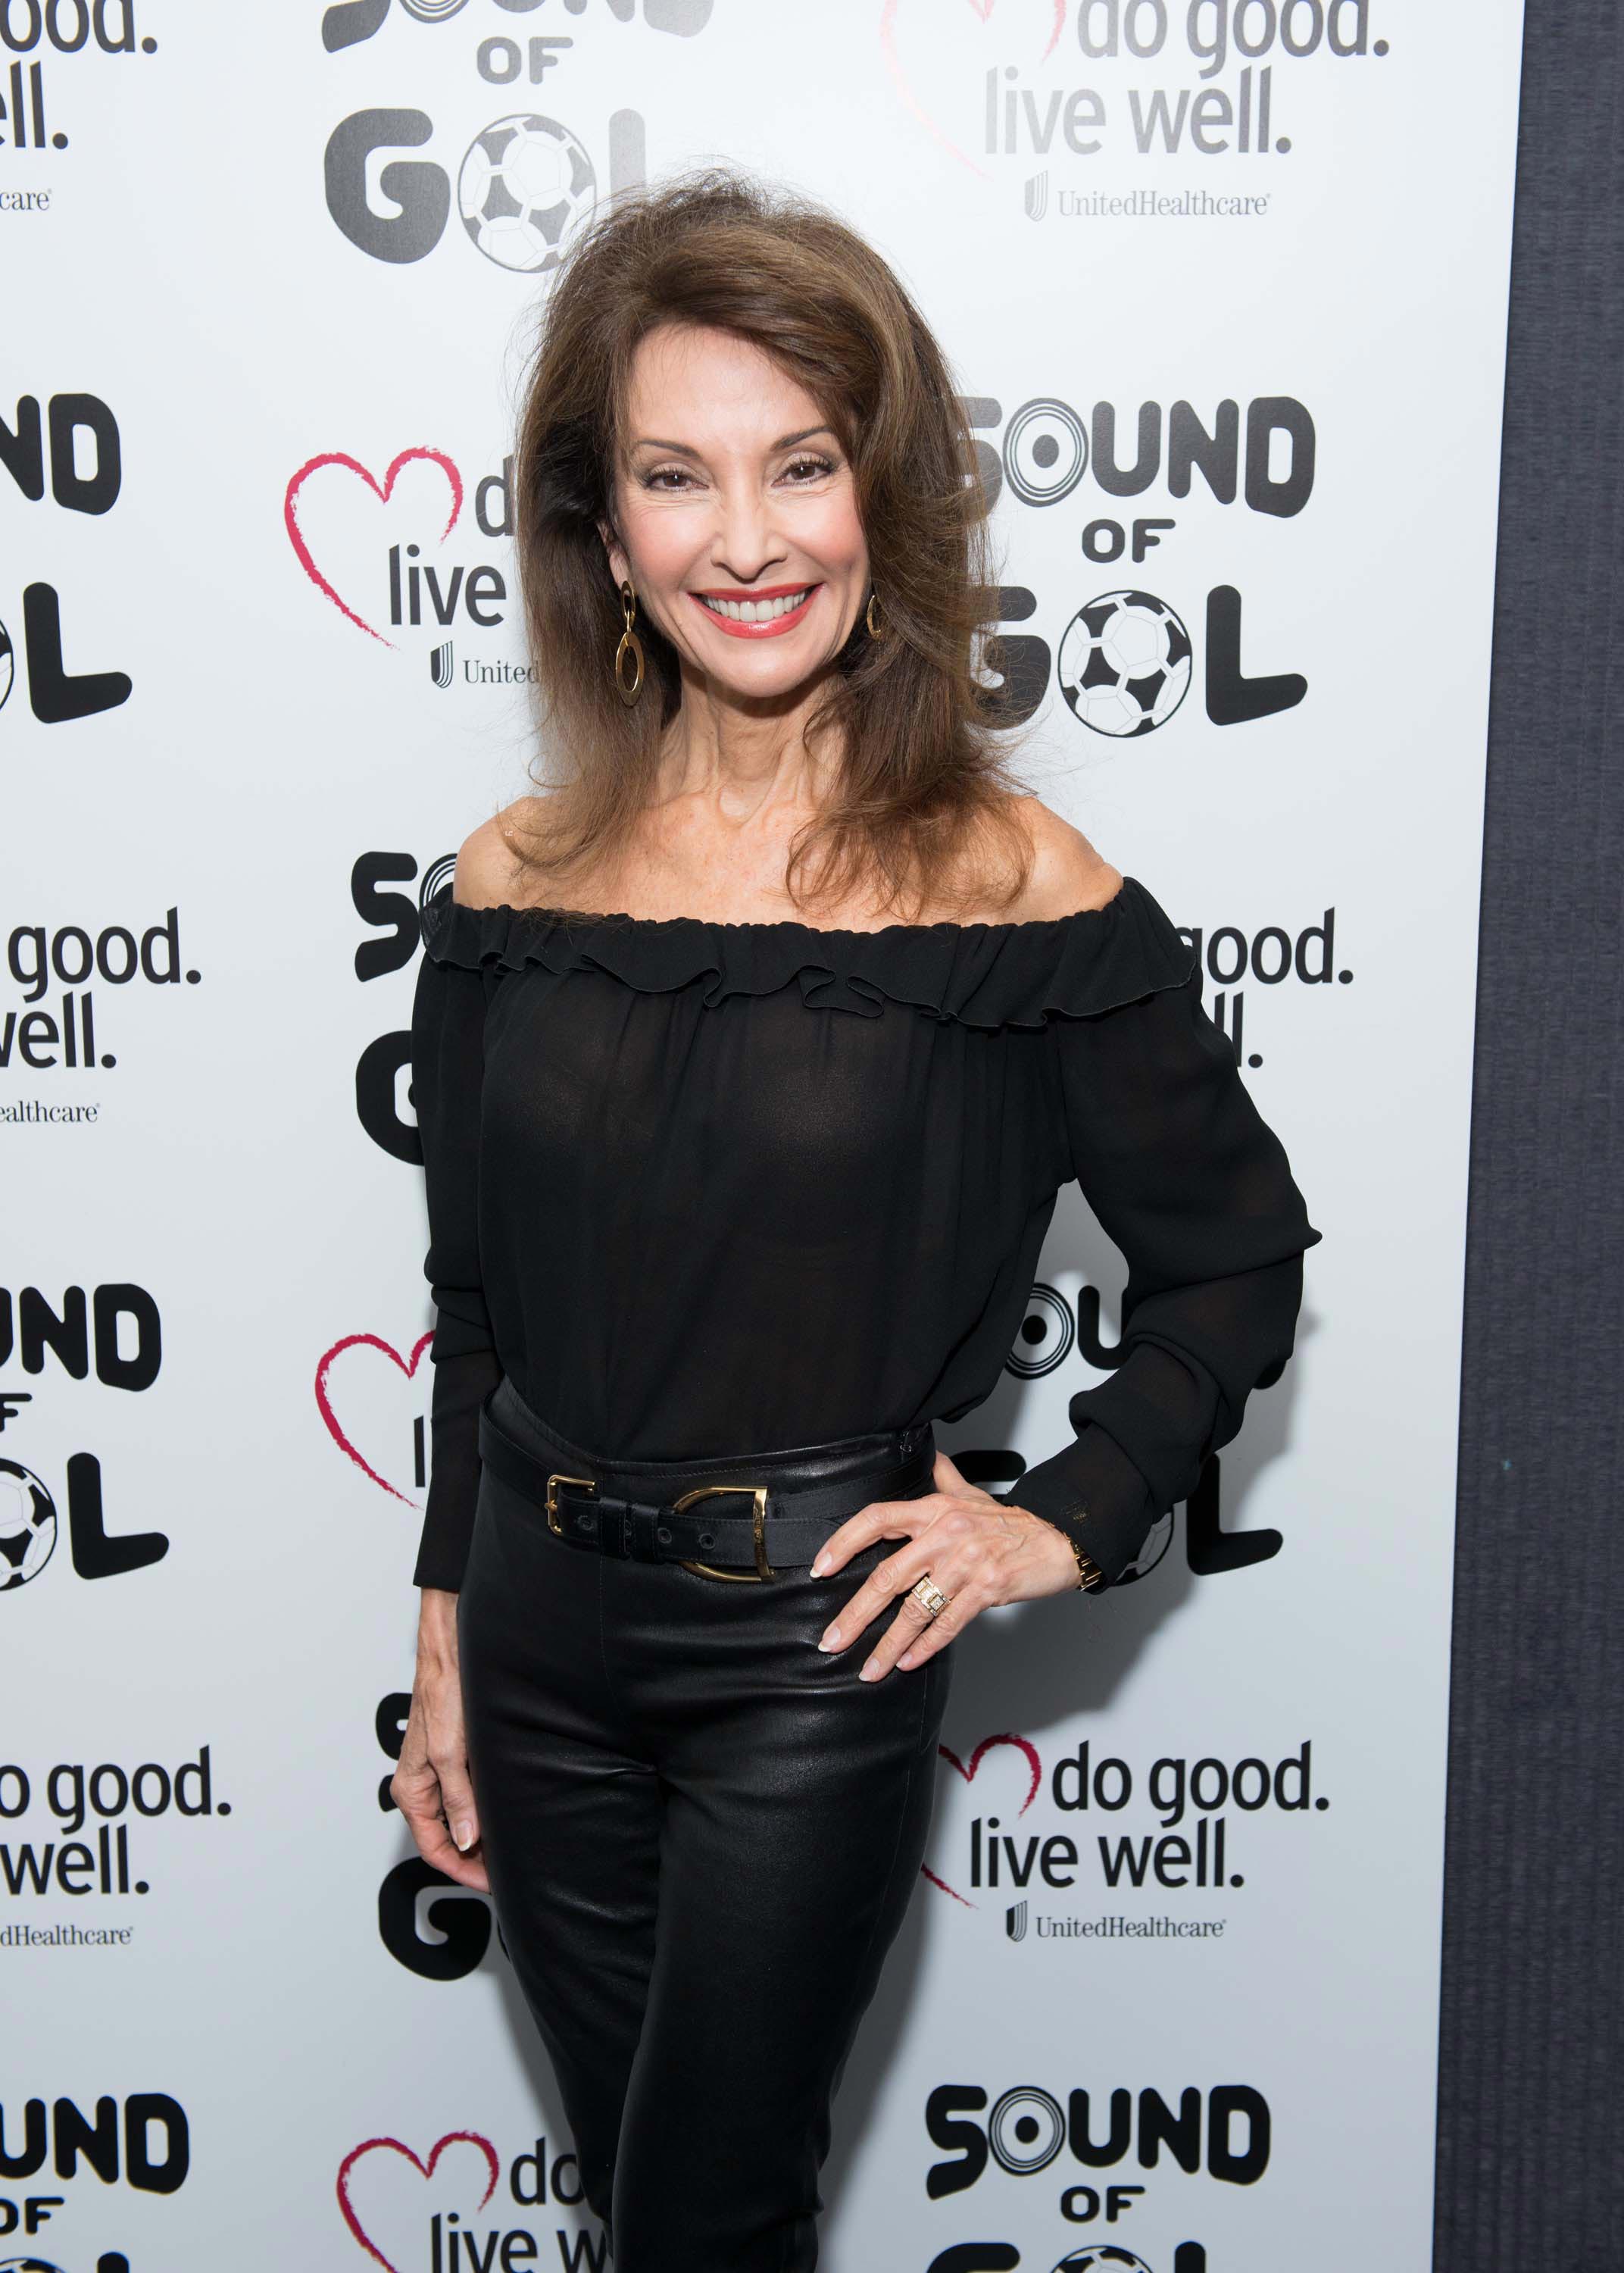 Susan Lucci attends the 2016 Sound of Gol Fundraiser